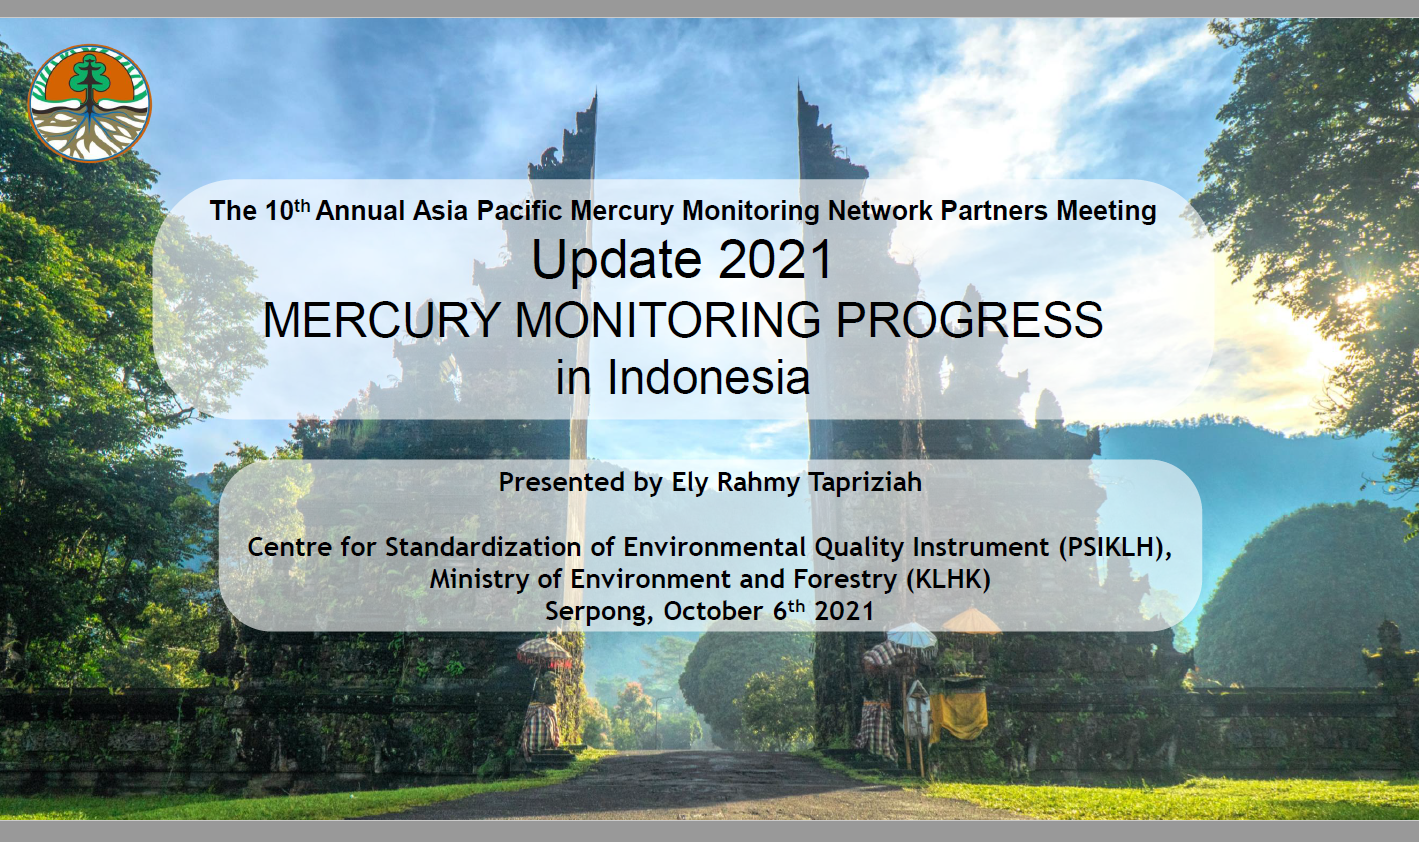 First page of Update 2021 MERCURY MONITORING PROGRESS in Indonesia